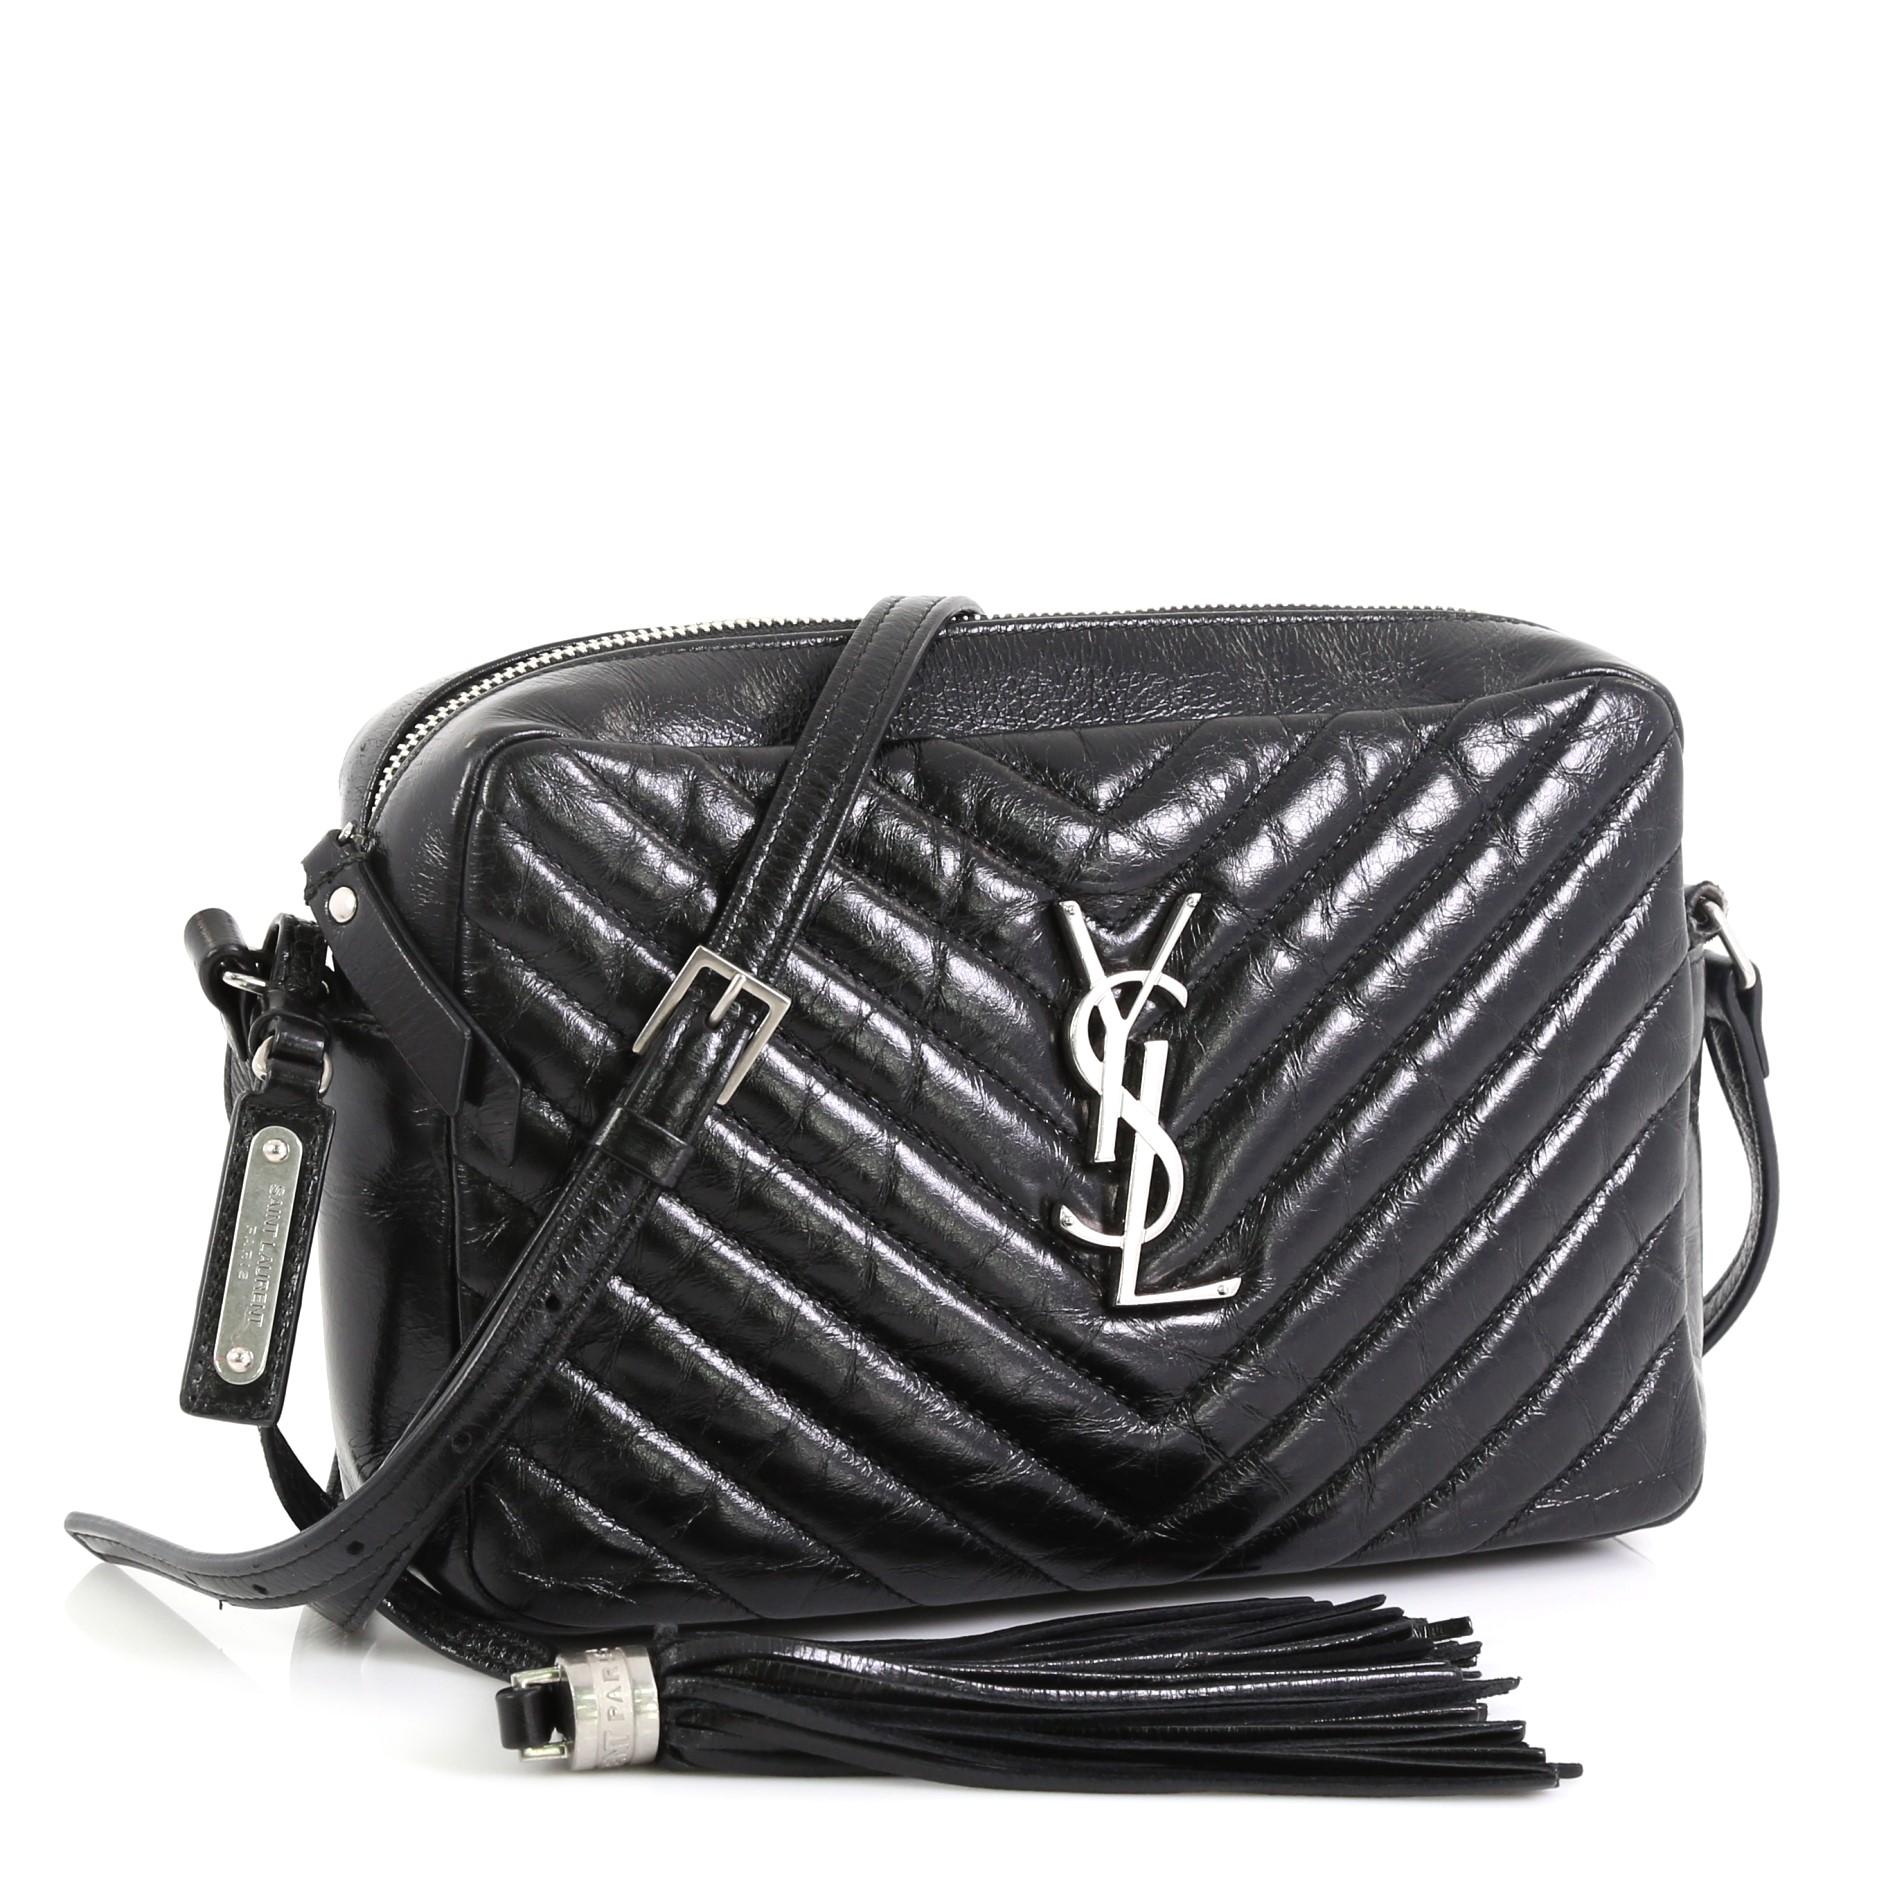 This Saint Laurent Lou Camera Bag Matelasse Chevron Leather Small, crafted from black matelasse chevron leather, features long leather strap, YSL monogram logo at the front, and silver-tone hardware. Its zip closure opens to a black fabric interior